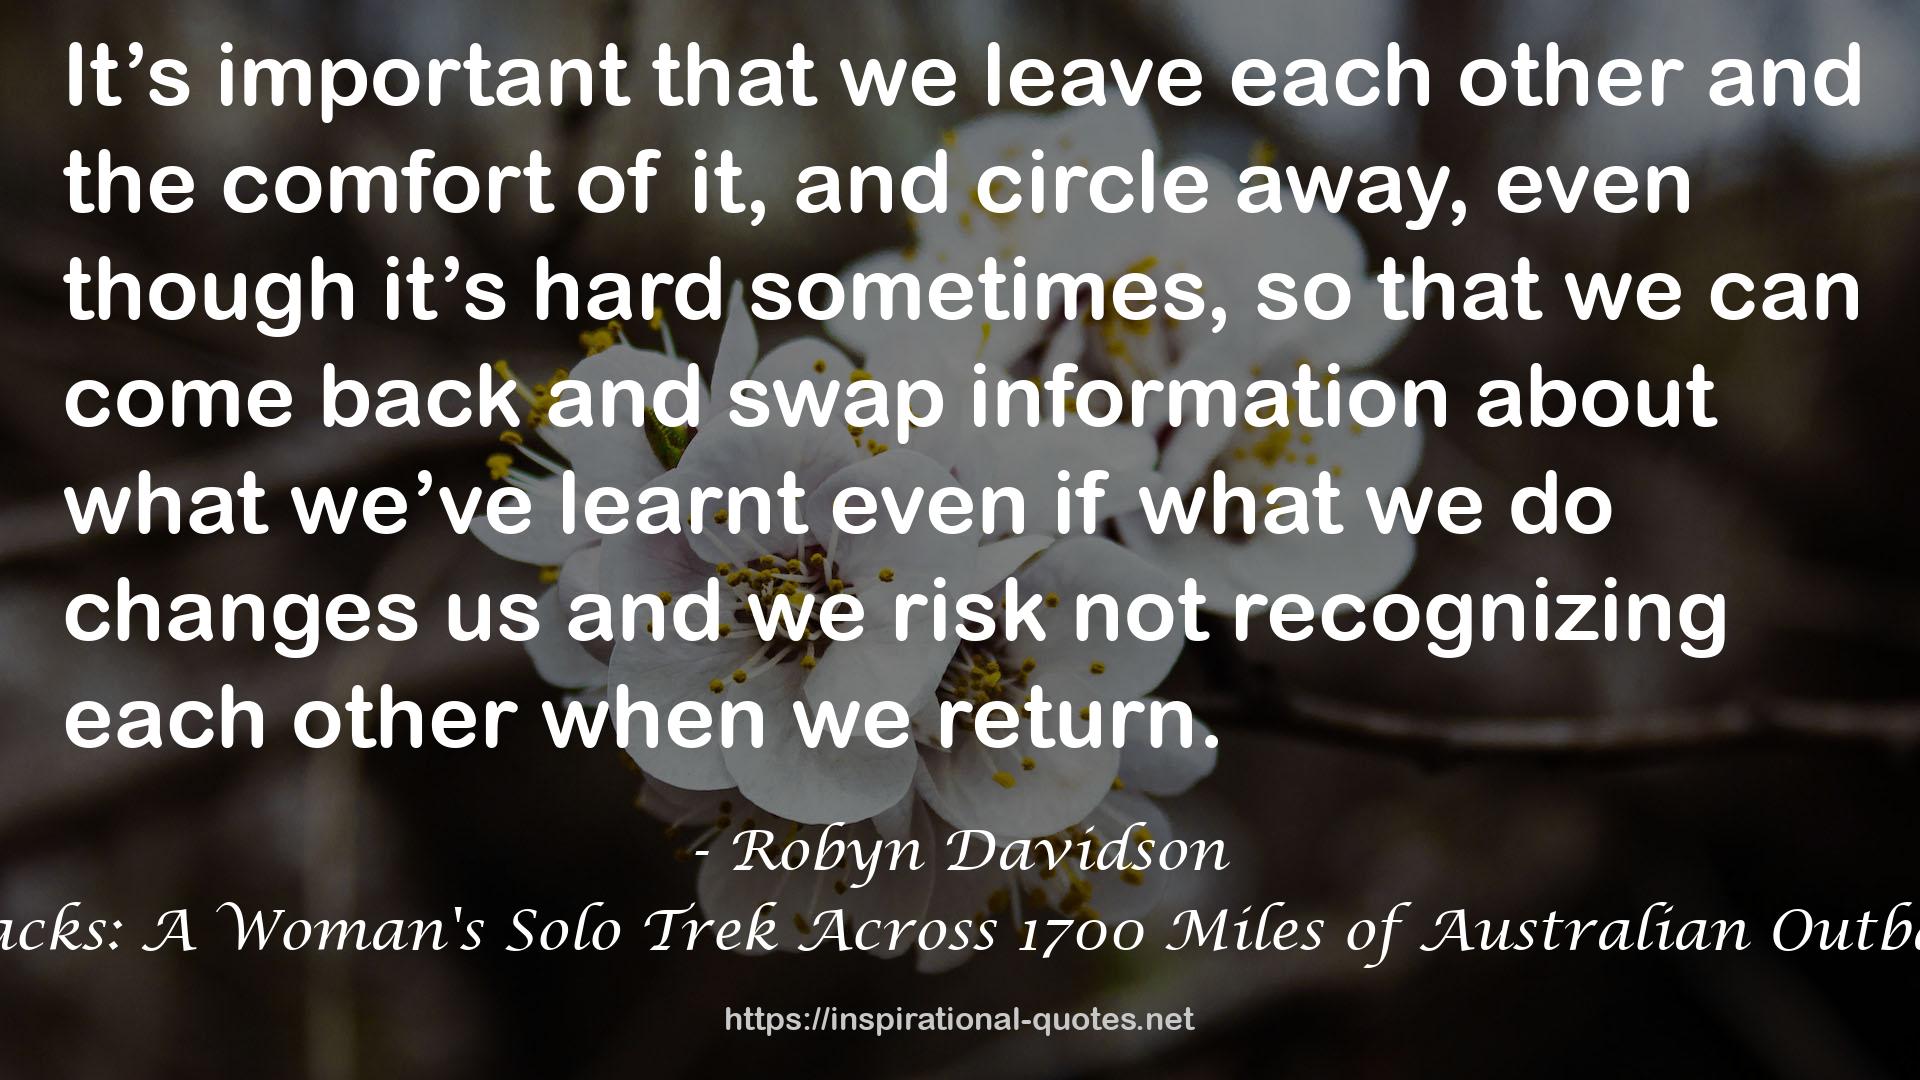 Robyn Davidson QUOTES